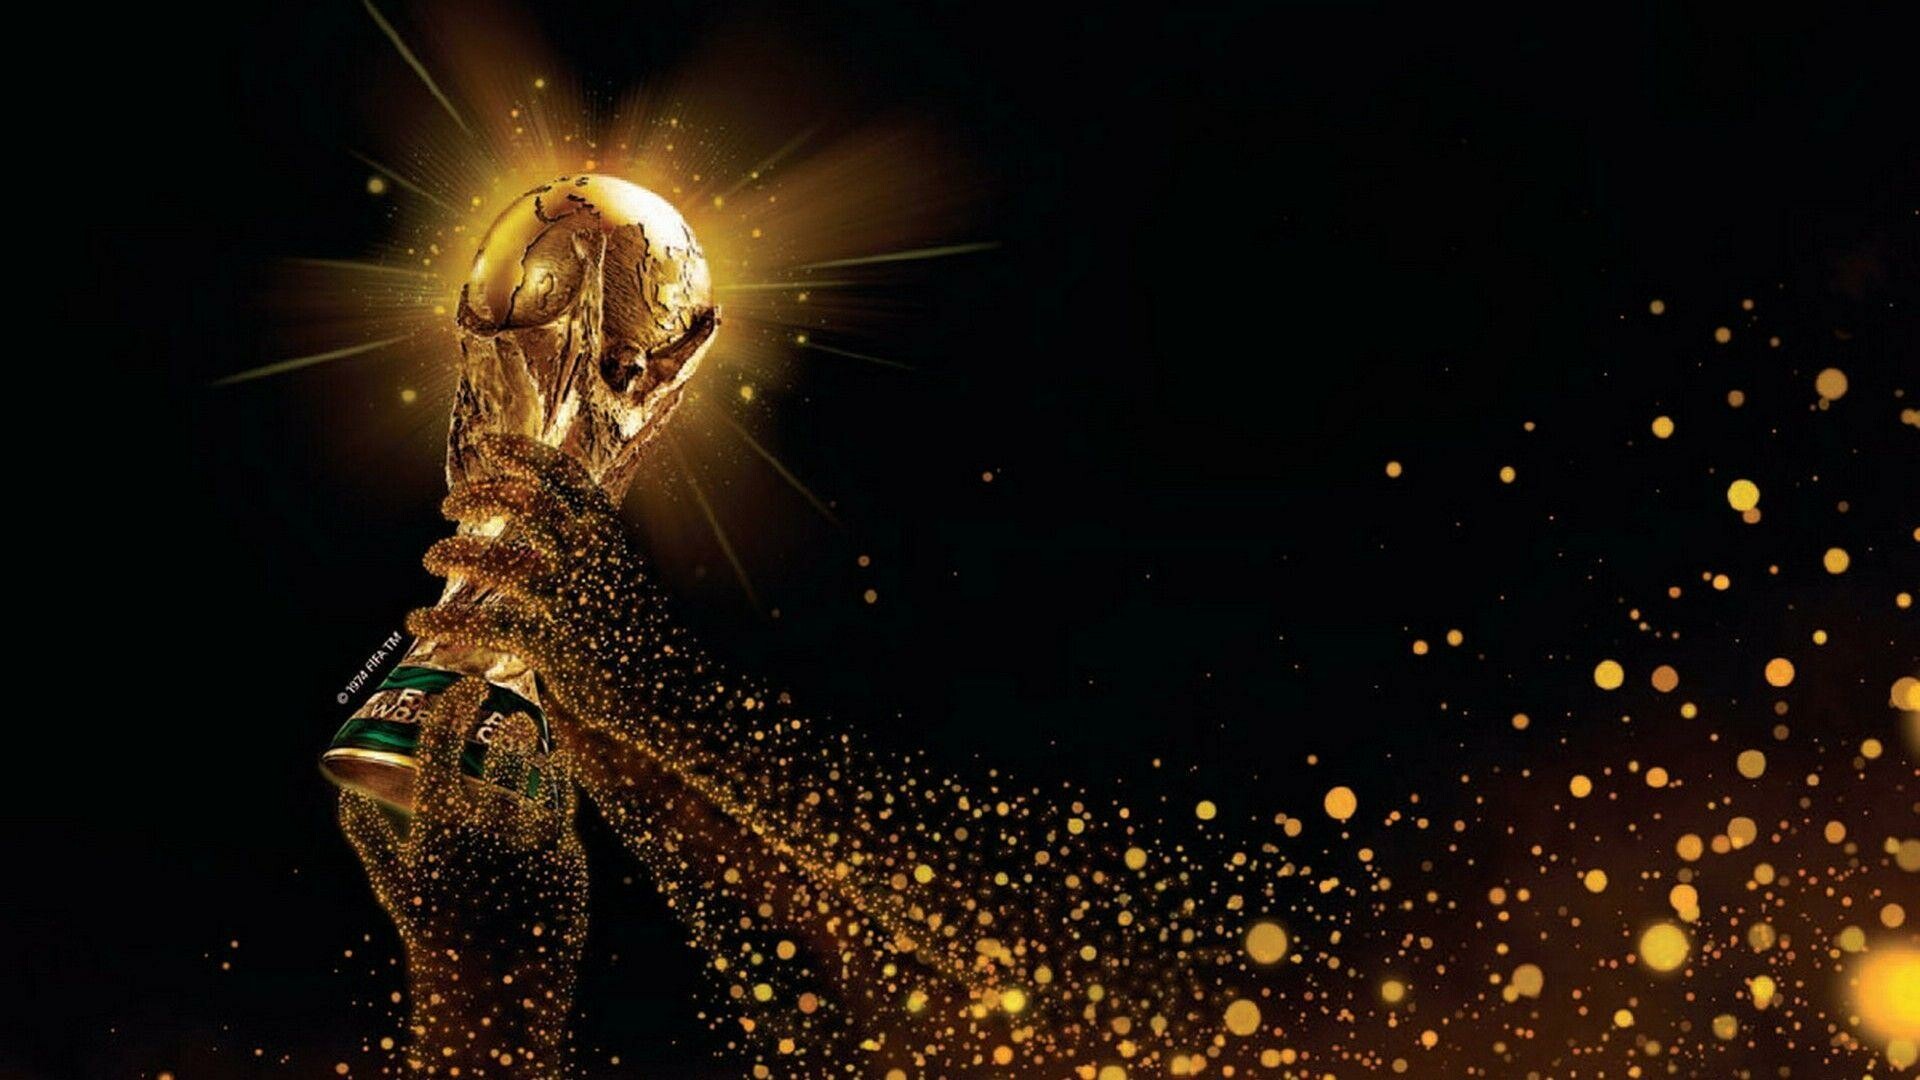 2022 FIFA World Cup, Exciting wallpapers, Global football celebration, FIFA tournament, 1920x1080 Full HD Desktop